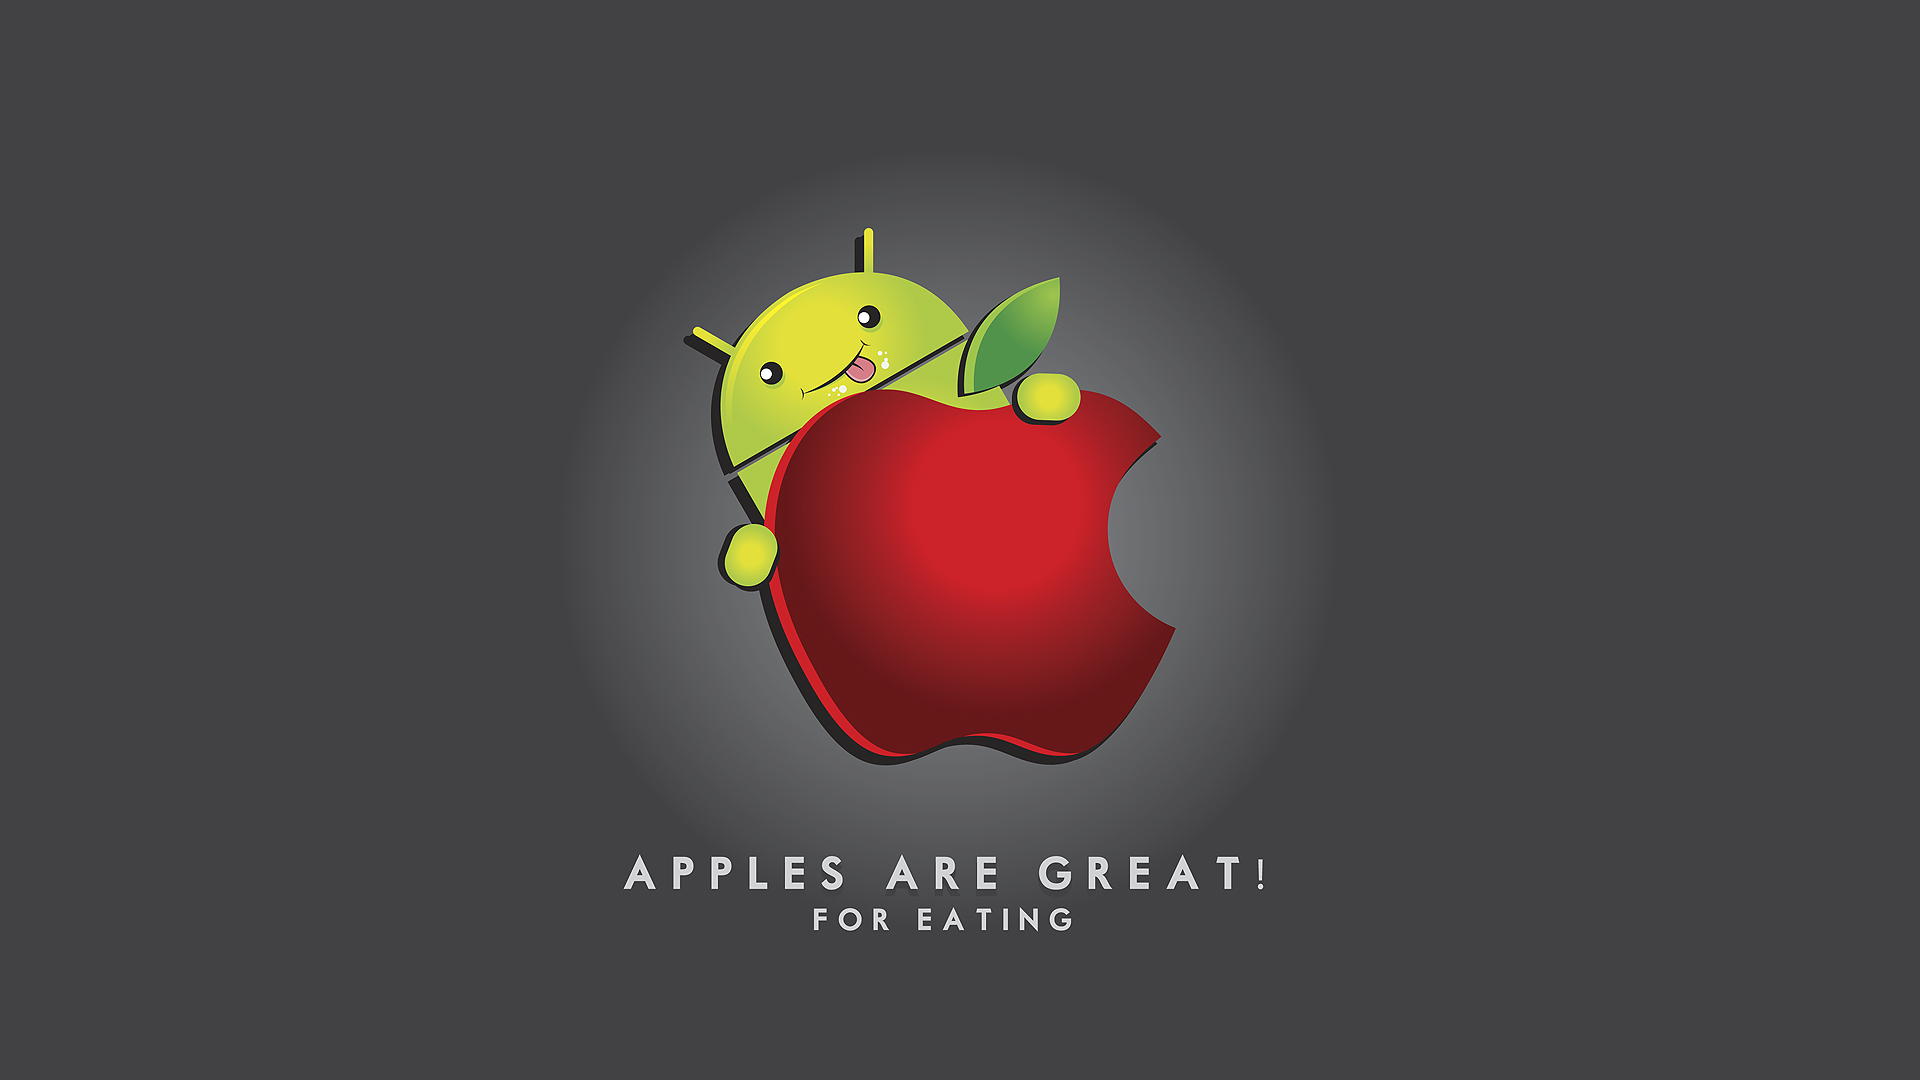 Android versus Apple wallpapers